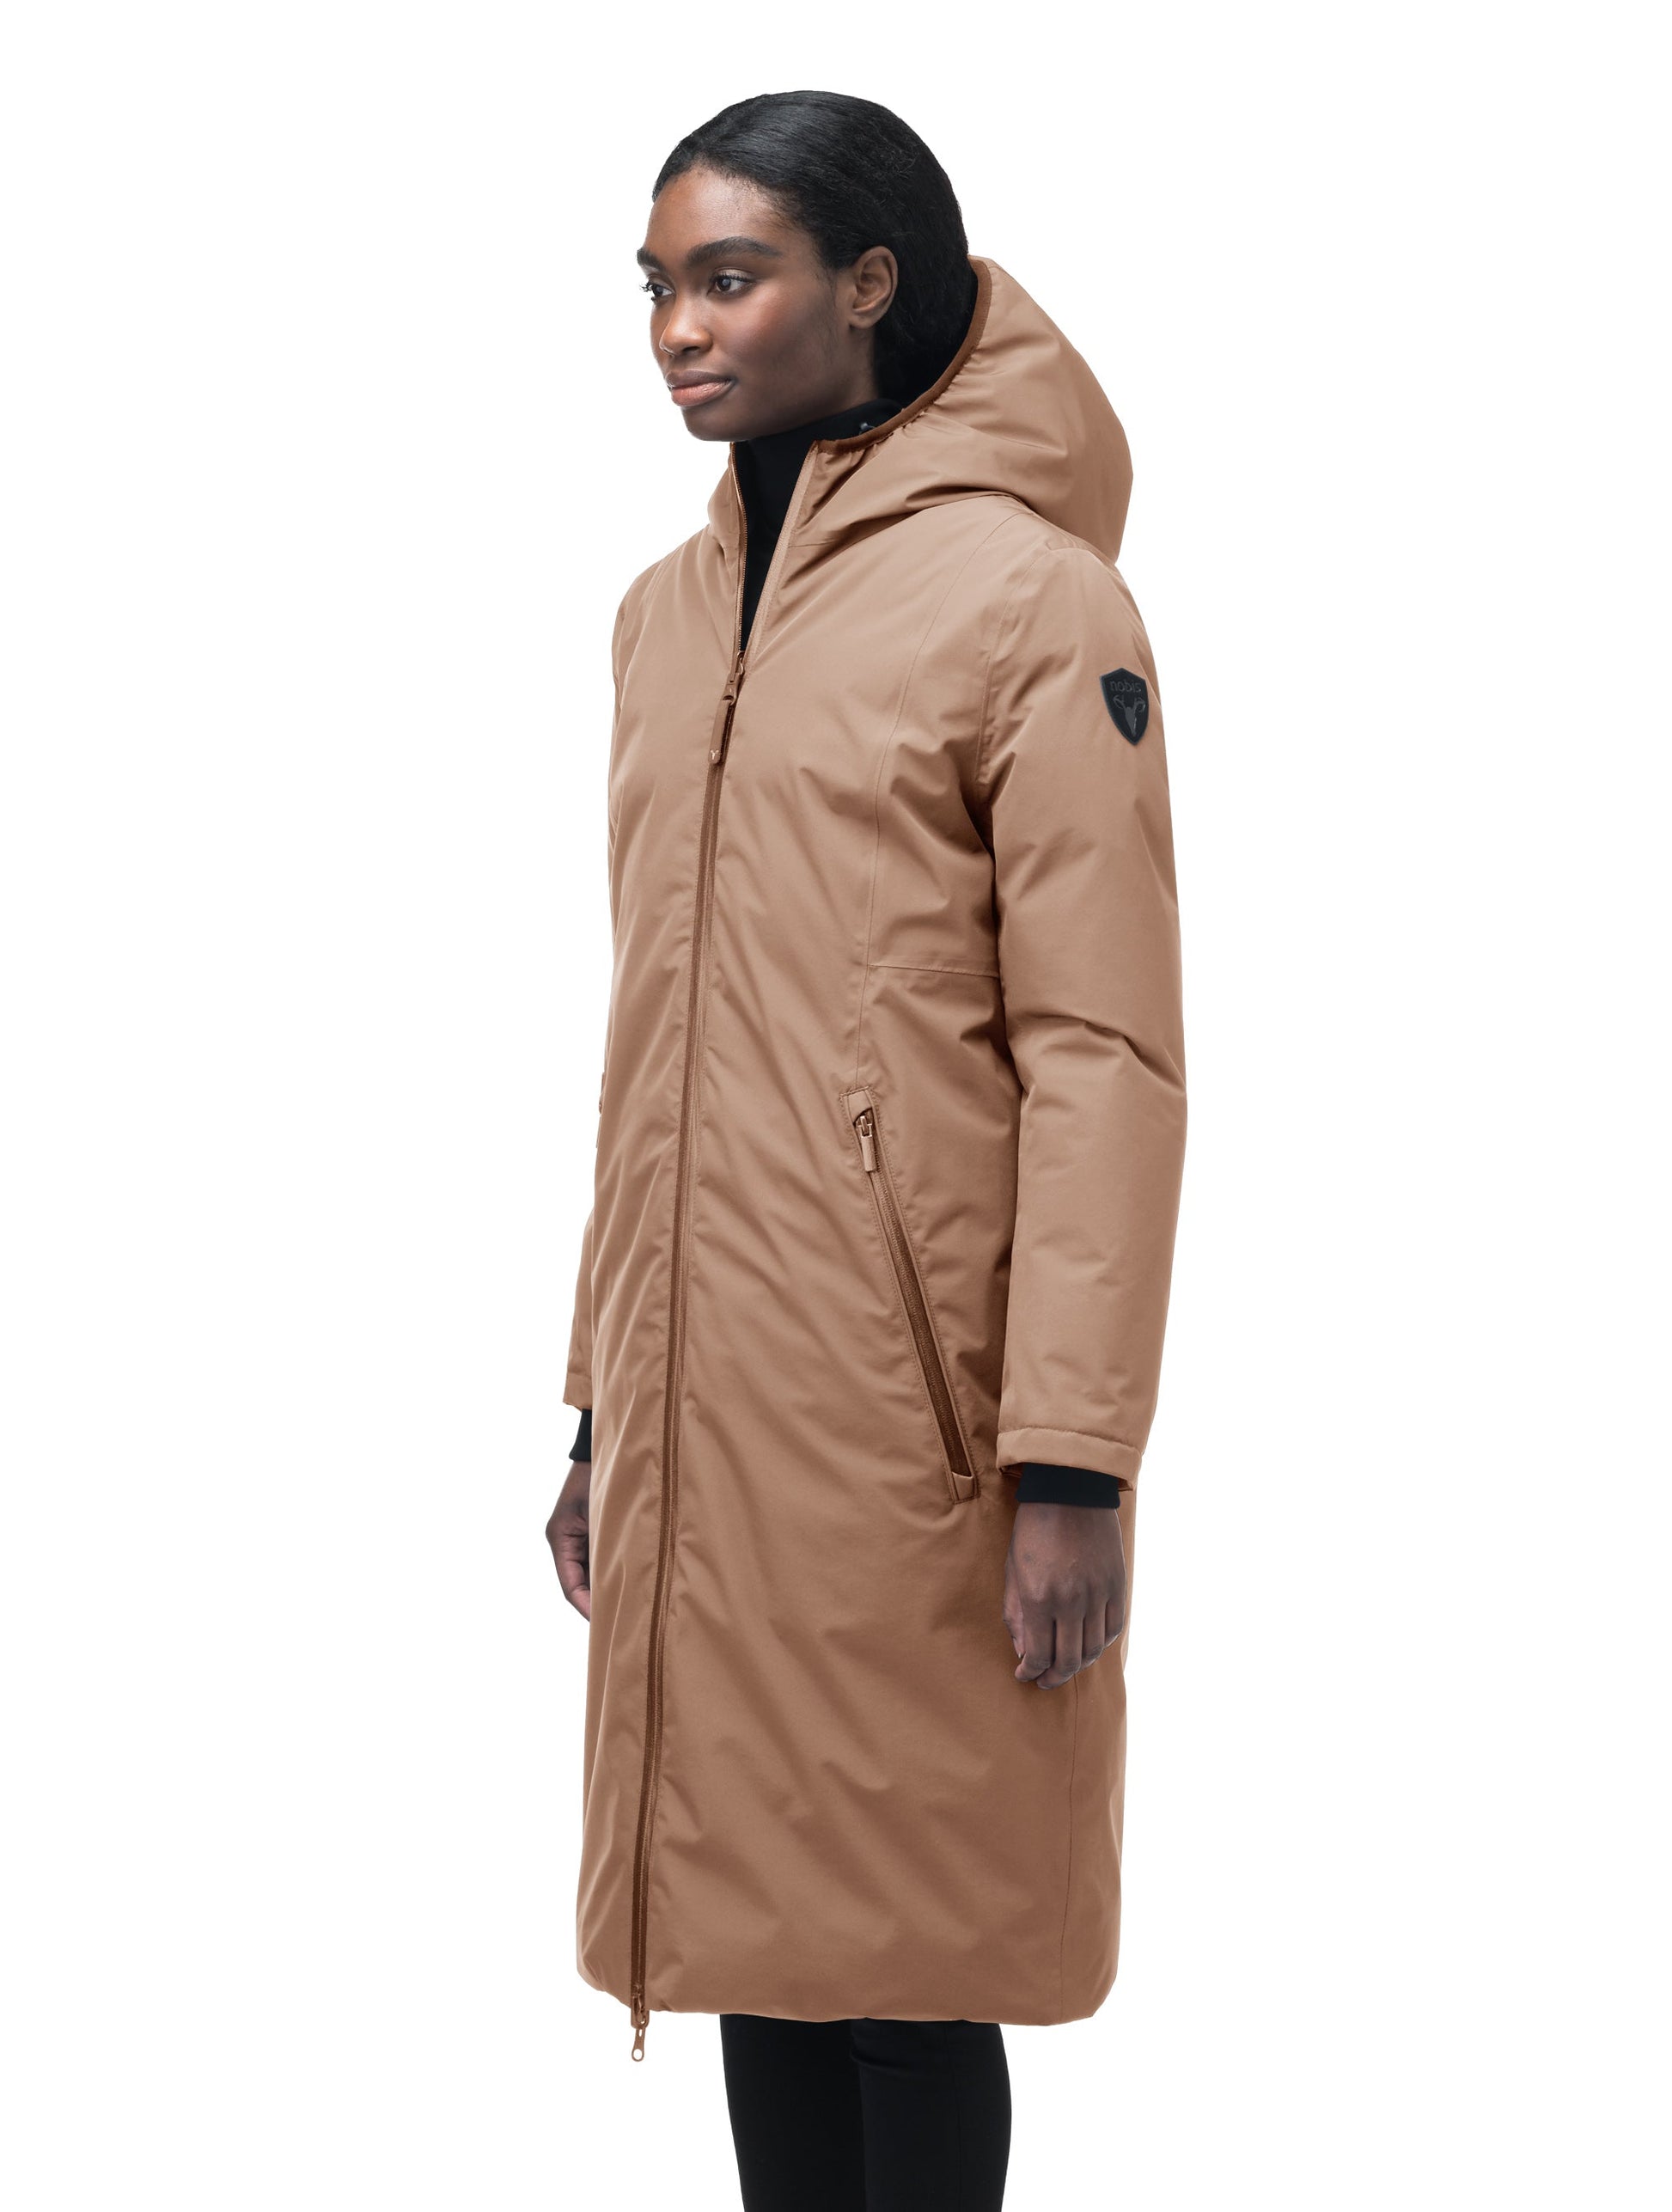 Ladies knee length reversible down-filled parka with non-removable hood in Fawn